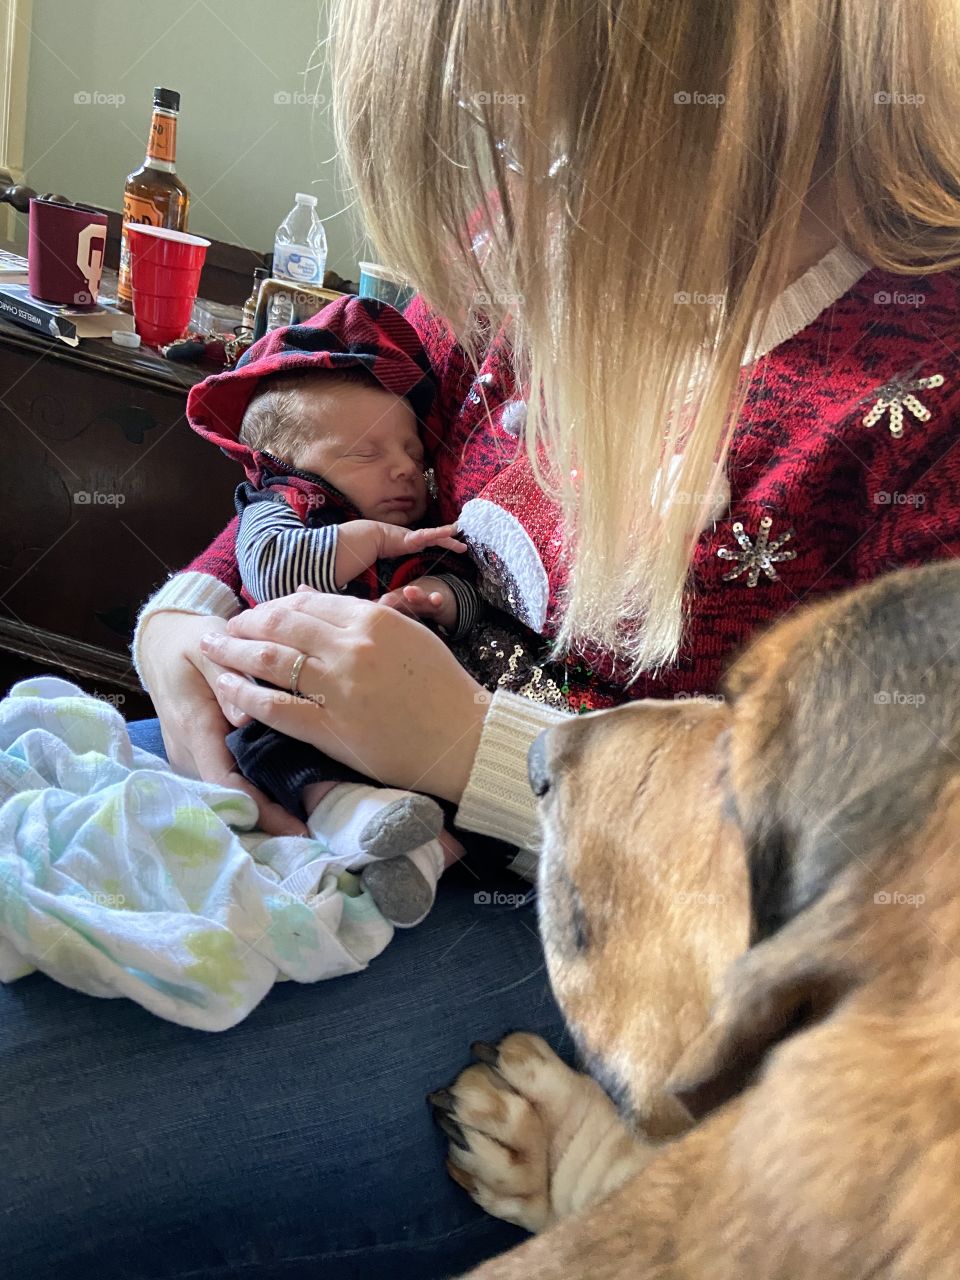 Dog curious about new baby 